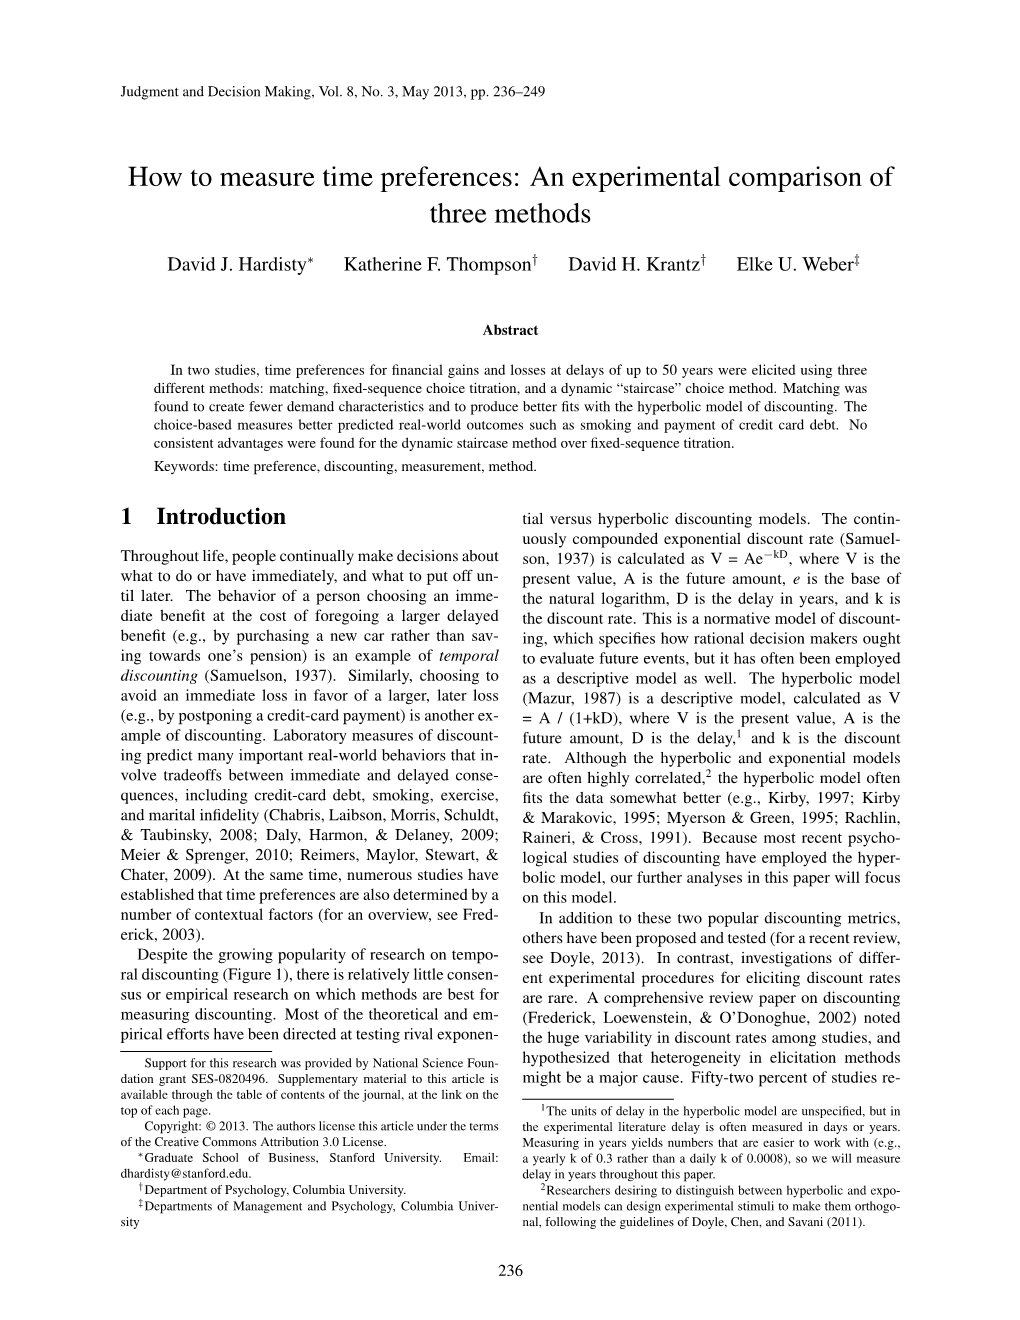 How to Measure Time Preferences: an Experimental Comparison of Three Methods